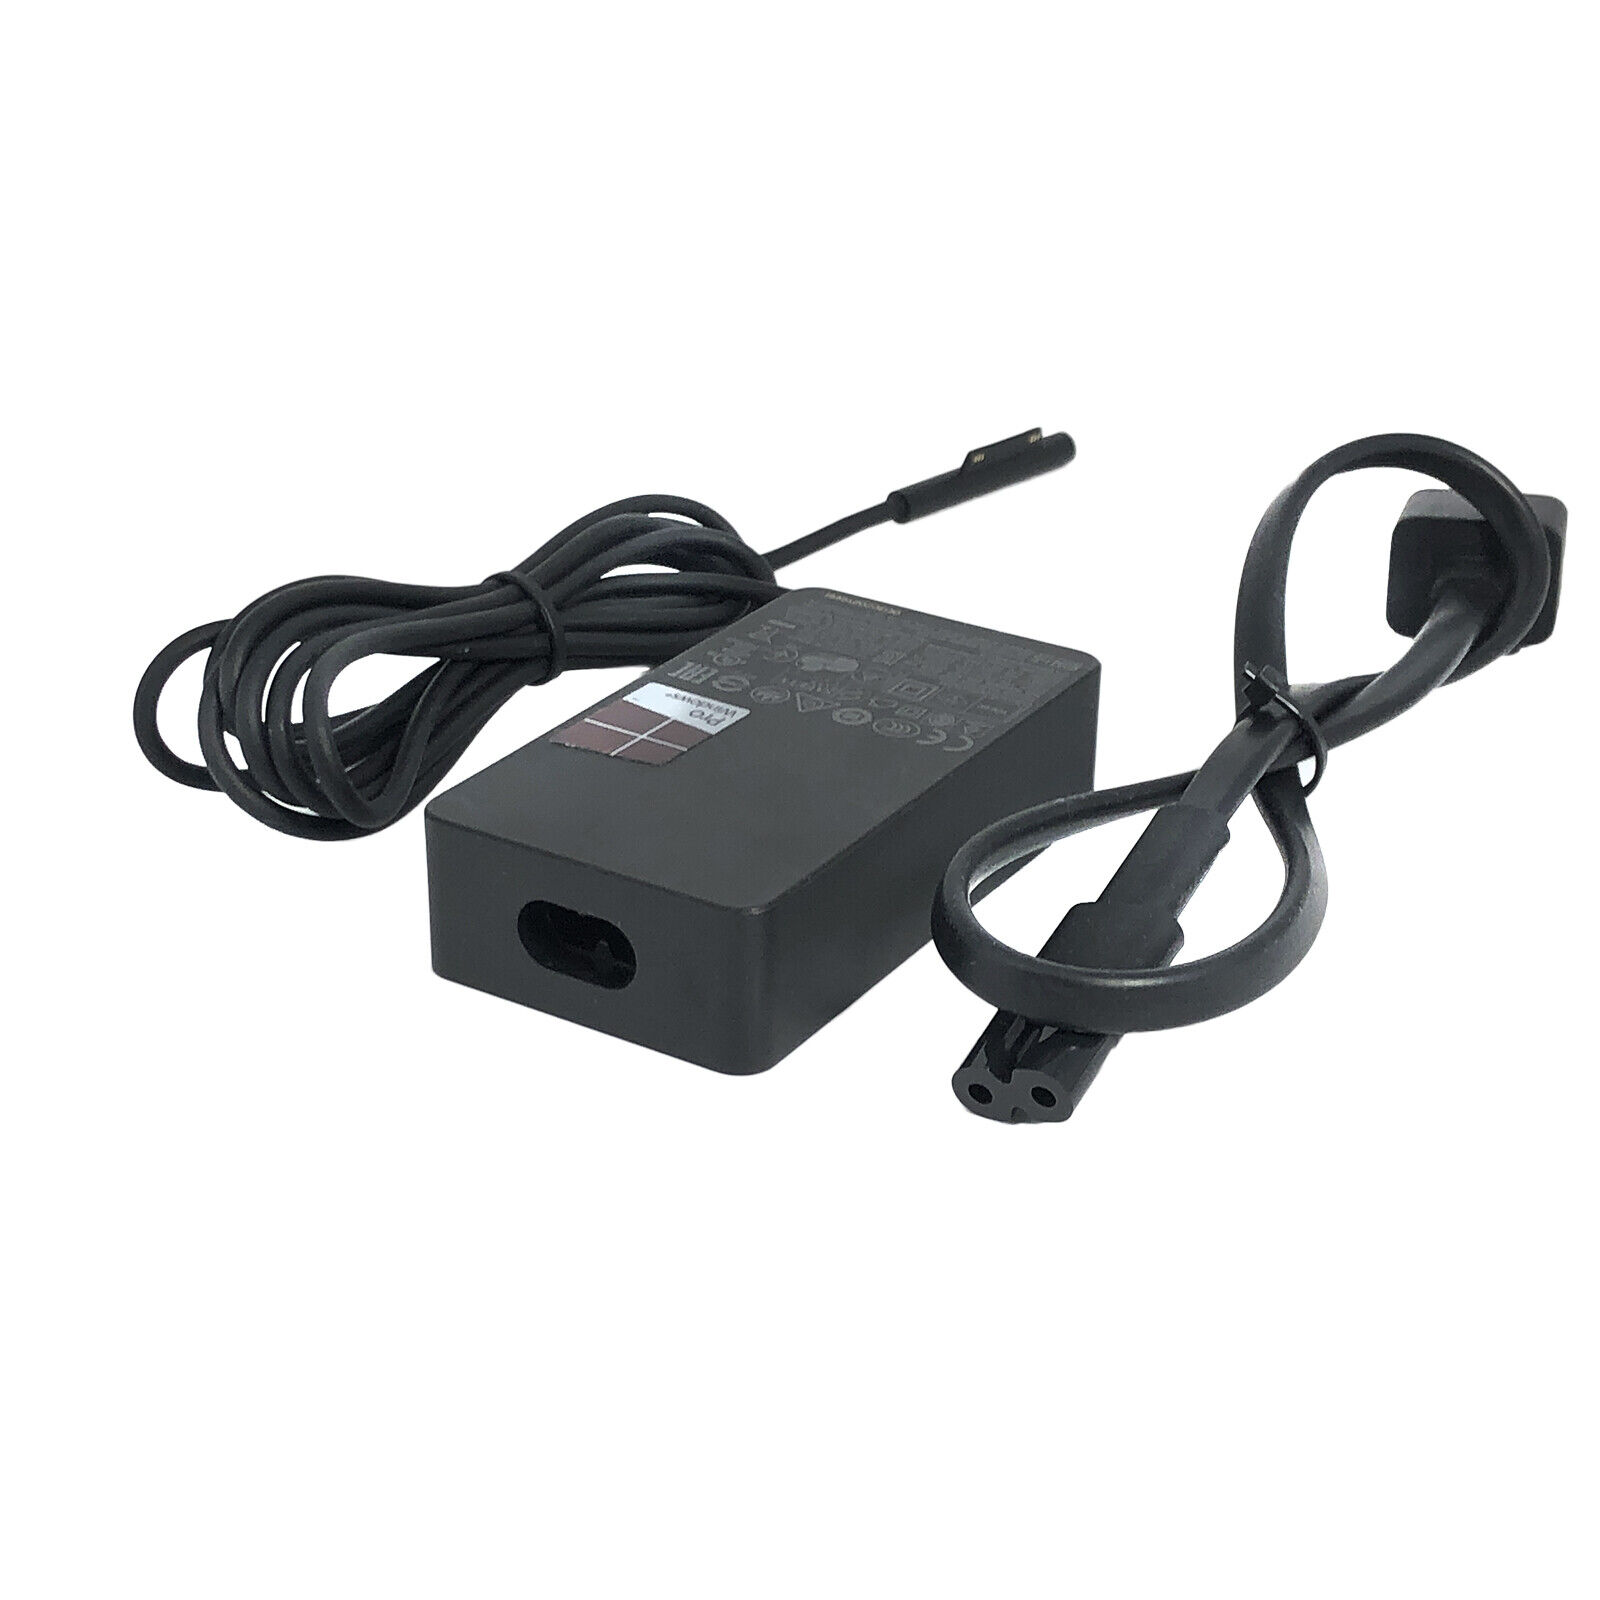 Genuine 36W Microsoft AC DC Adapter for Surface PRO 4 CR5-00003 W10P Tablet